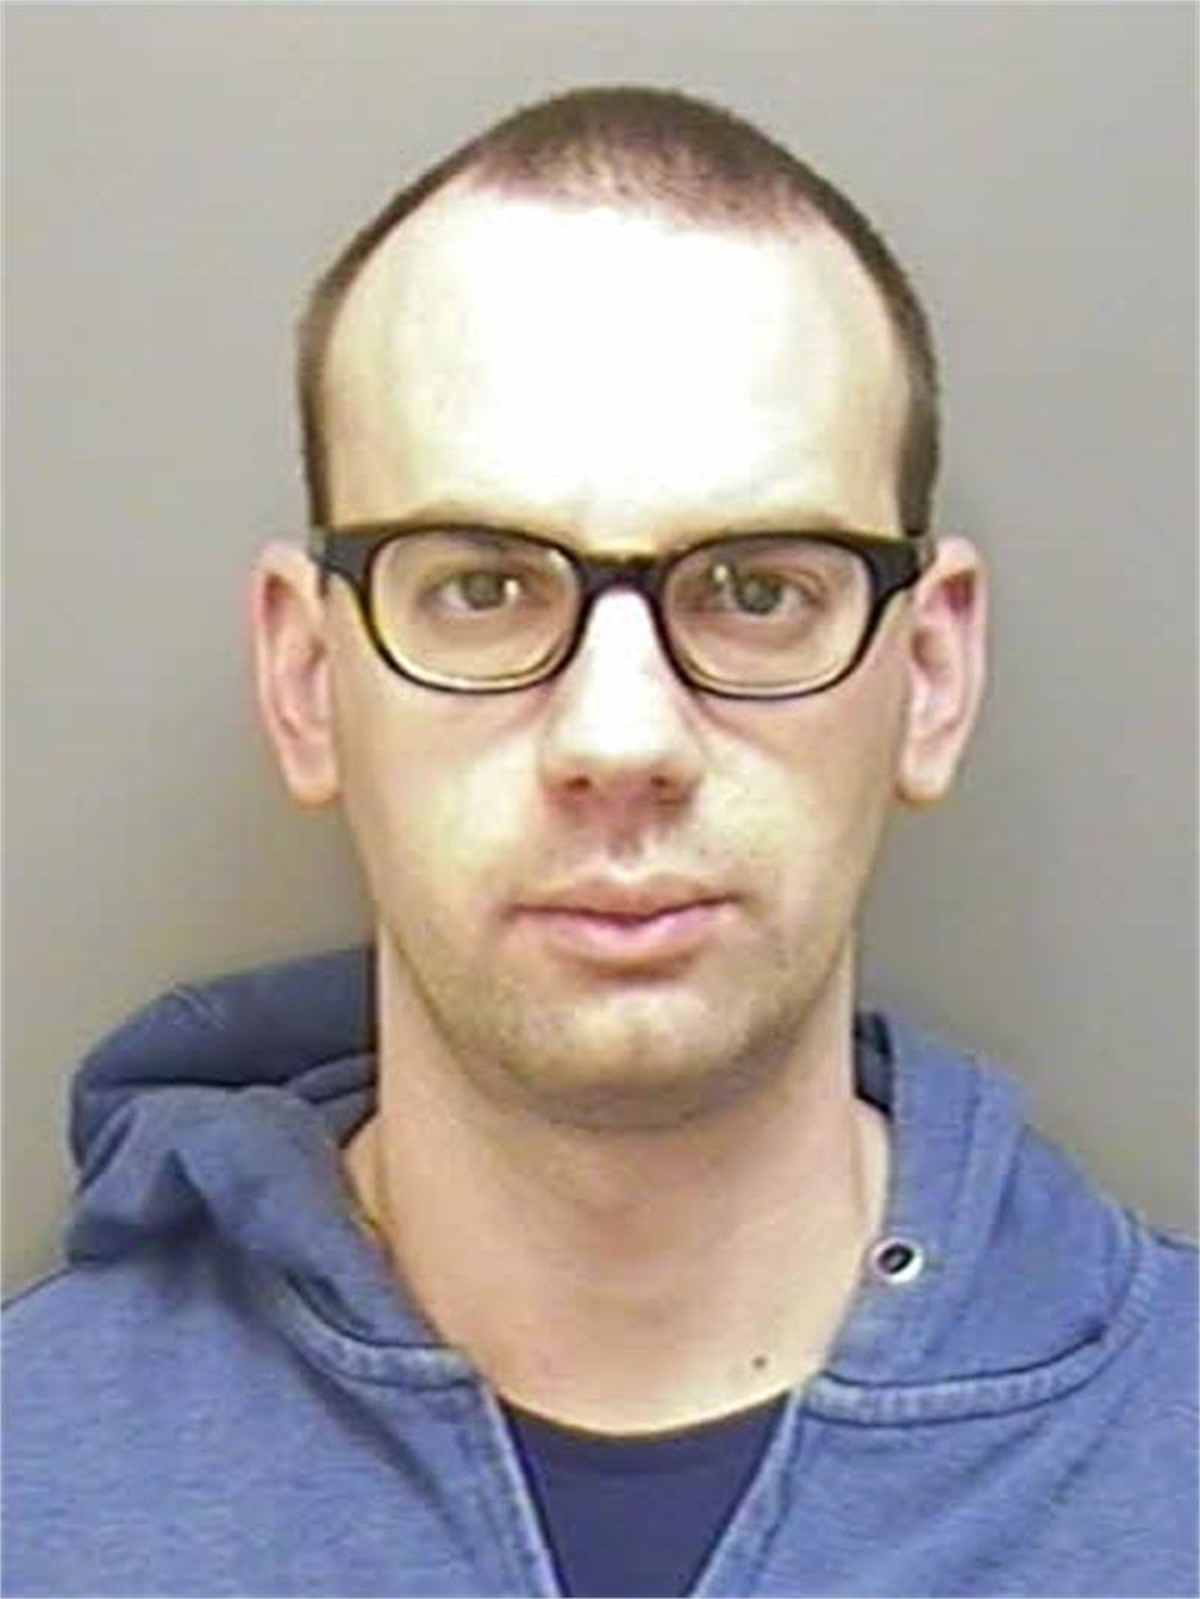 Clinton Ferreira was jailed for 20 years for a string of sex attacks (Devon and Cornwall Police/PA).